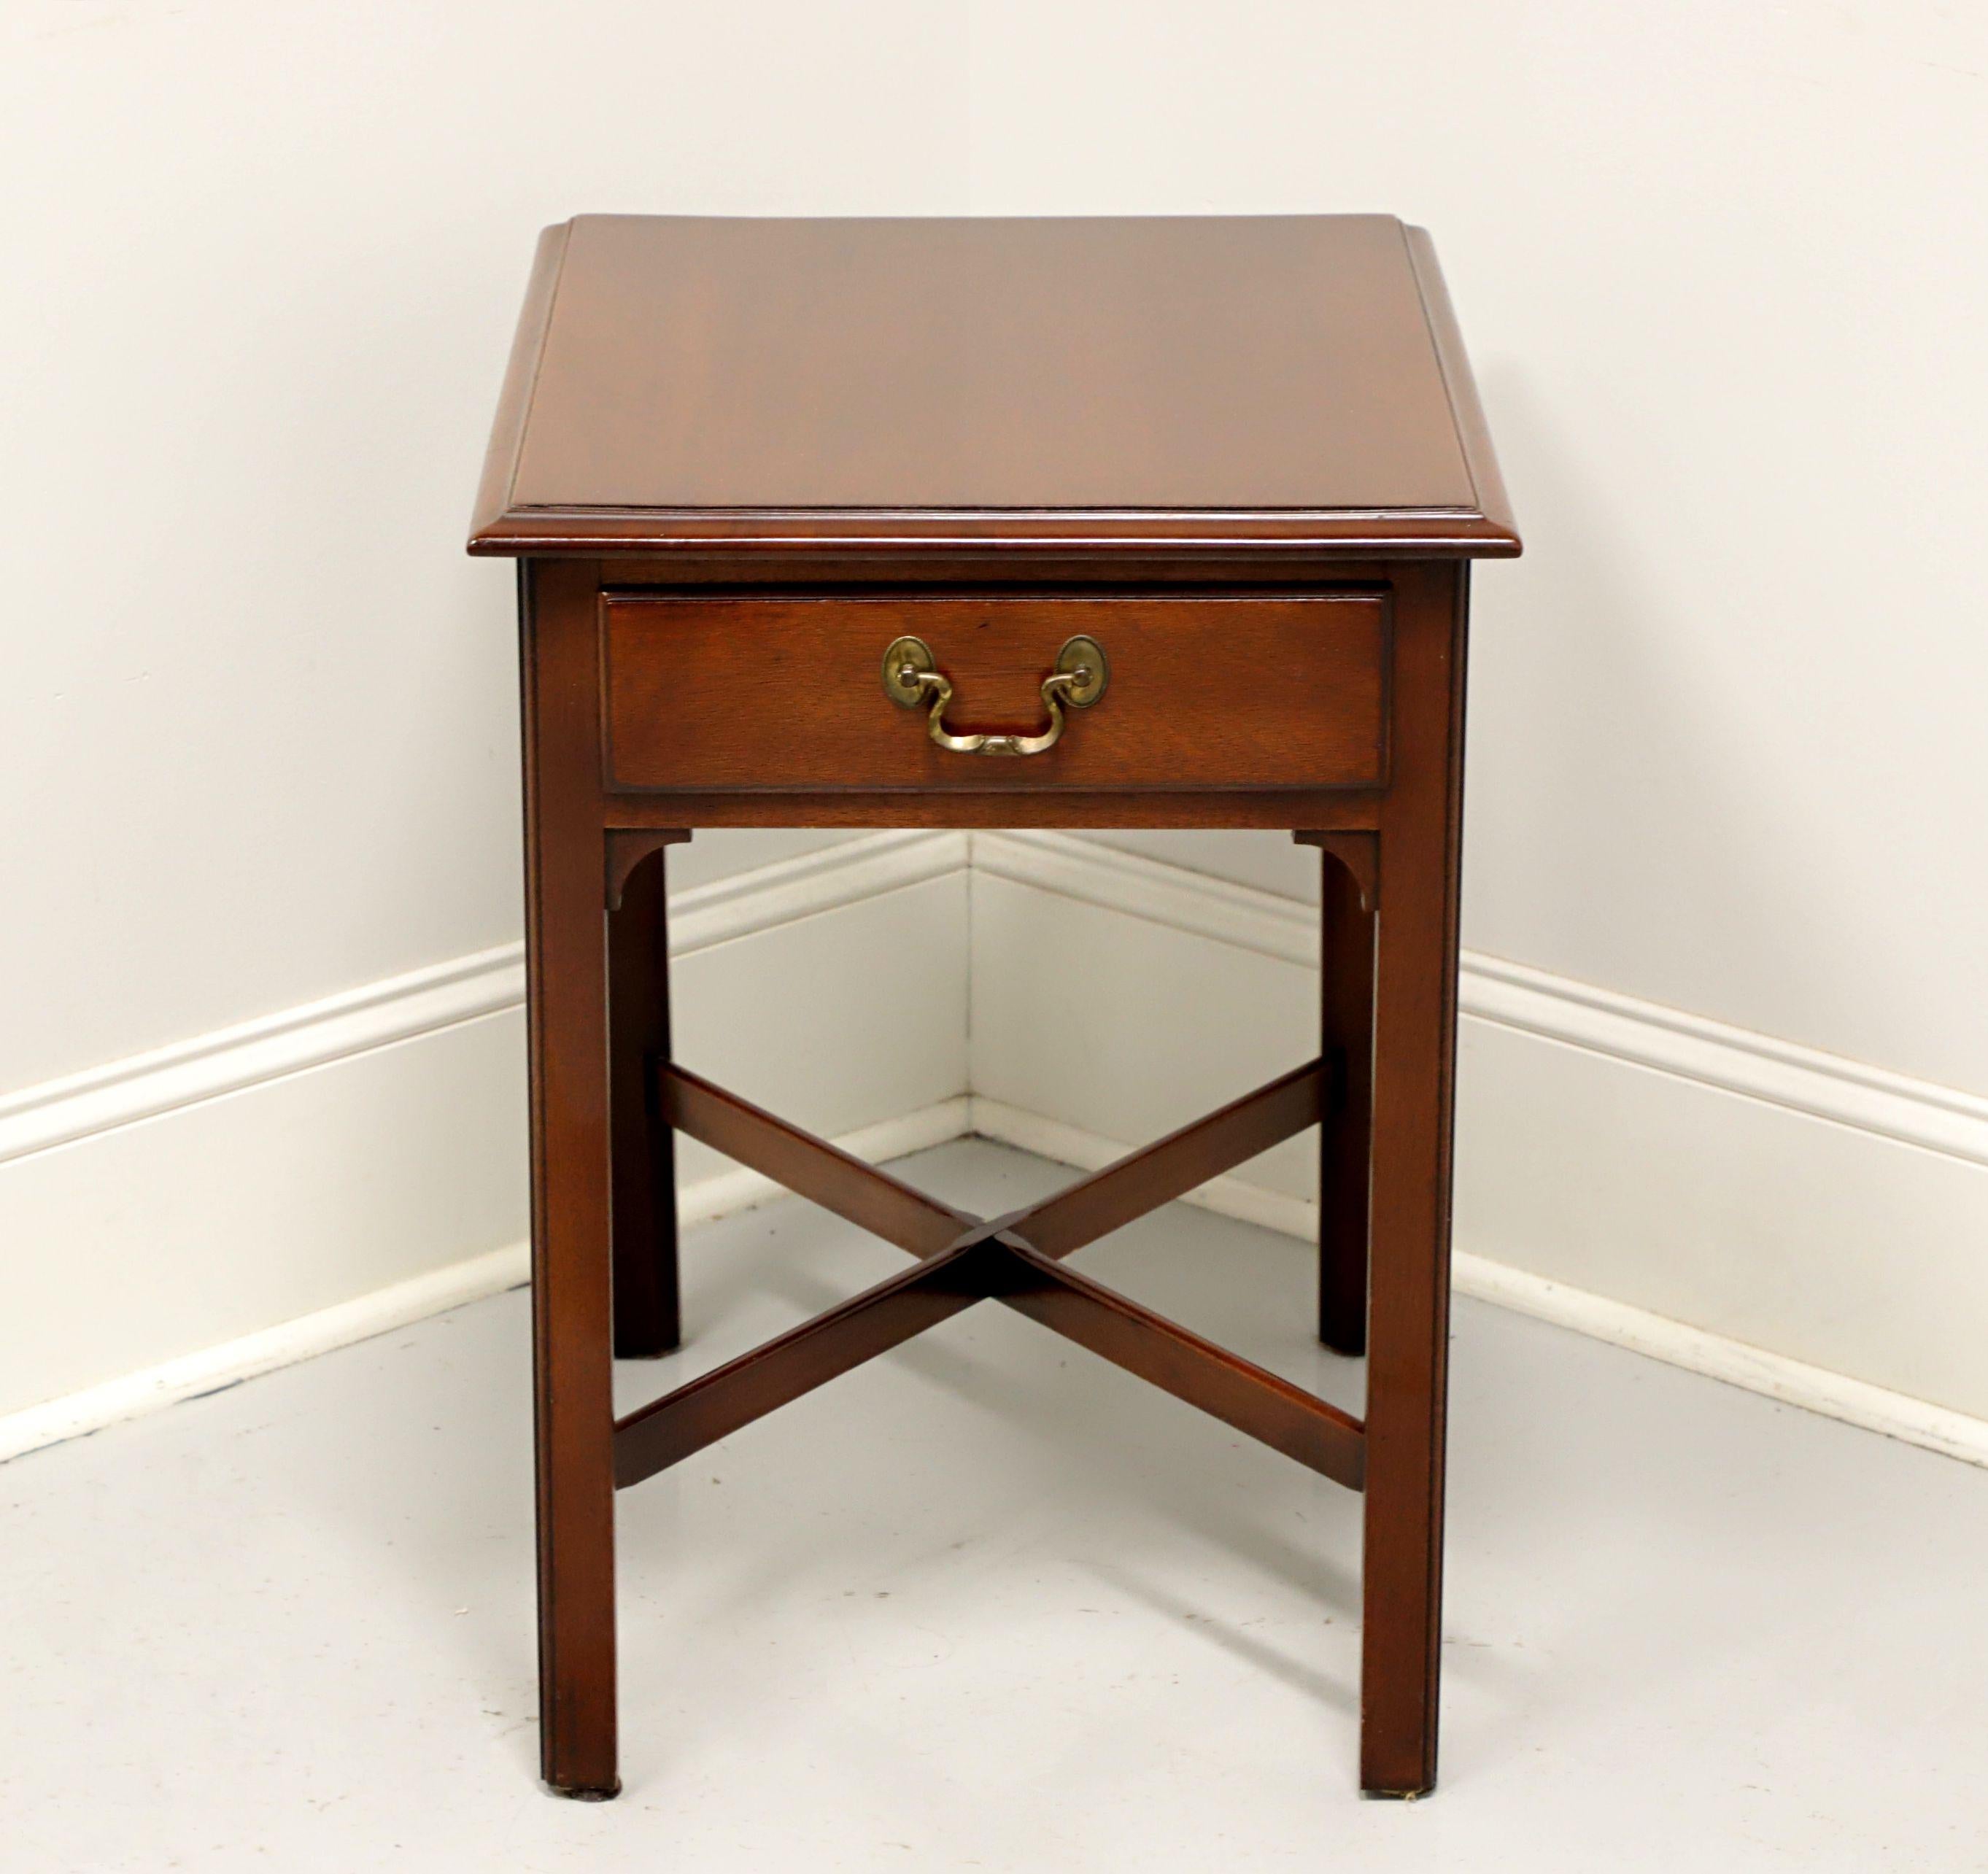 A Chippendale style side table by Link-Taylor, from their Heirloom Gallery. Solid mahogany with brass hardware, straight legs and 